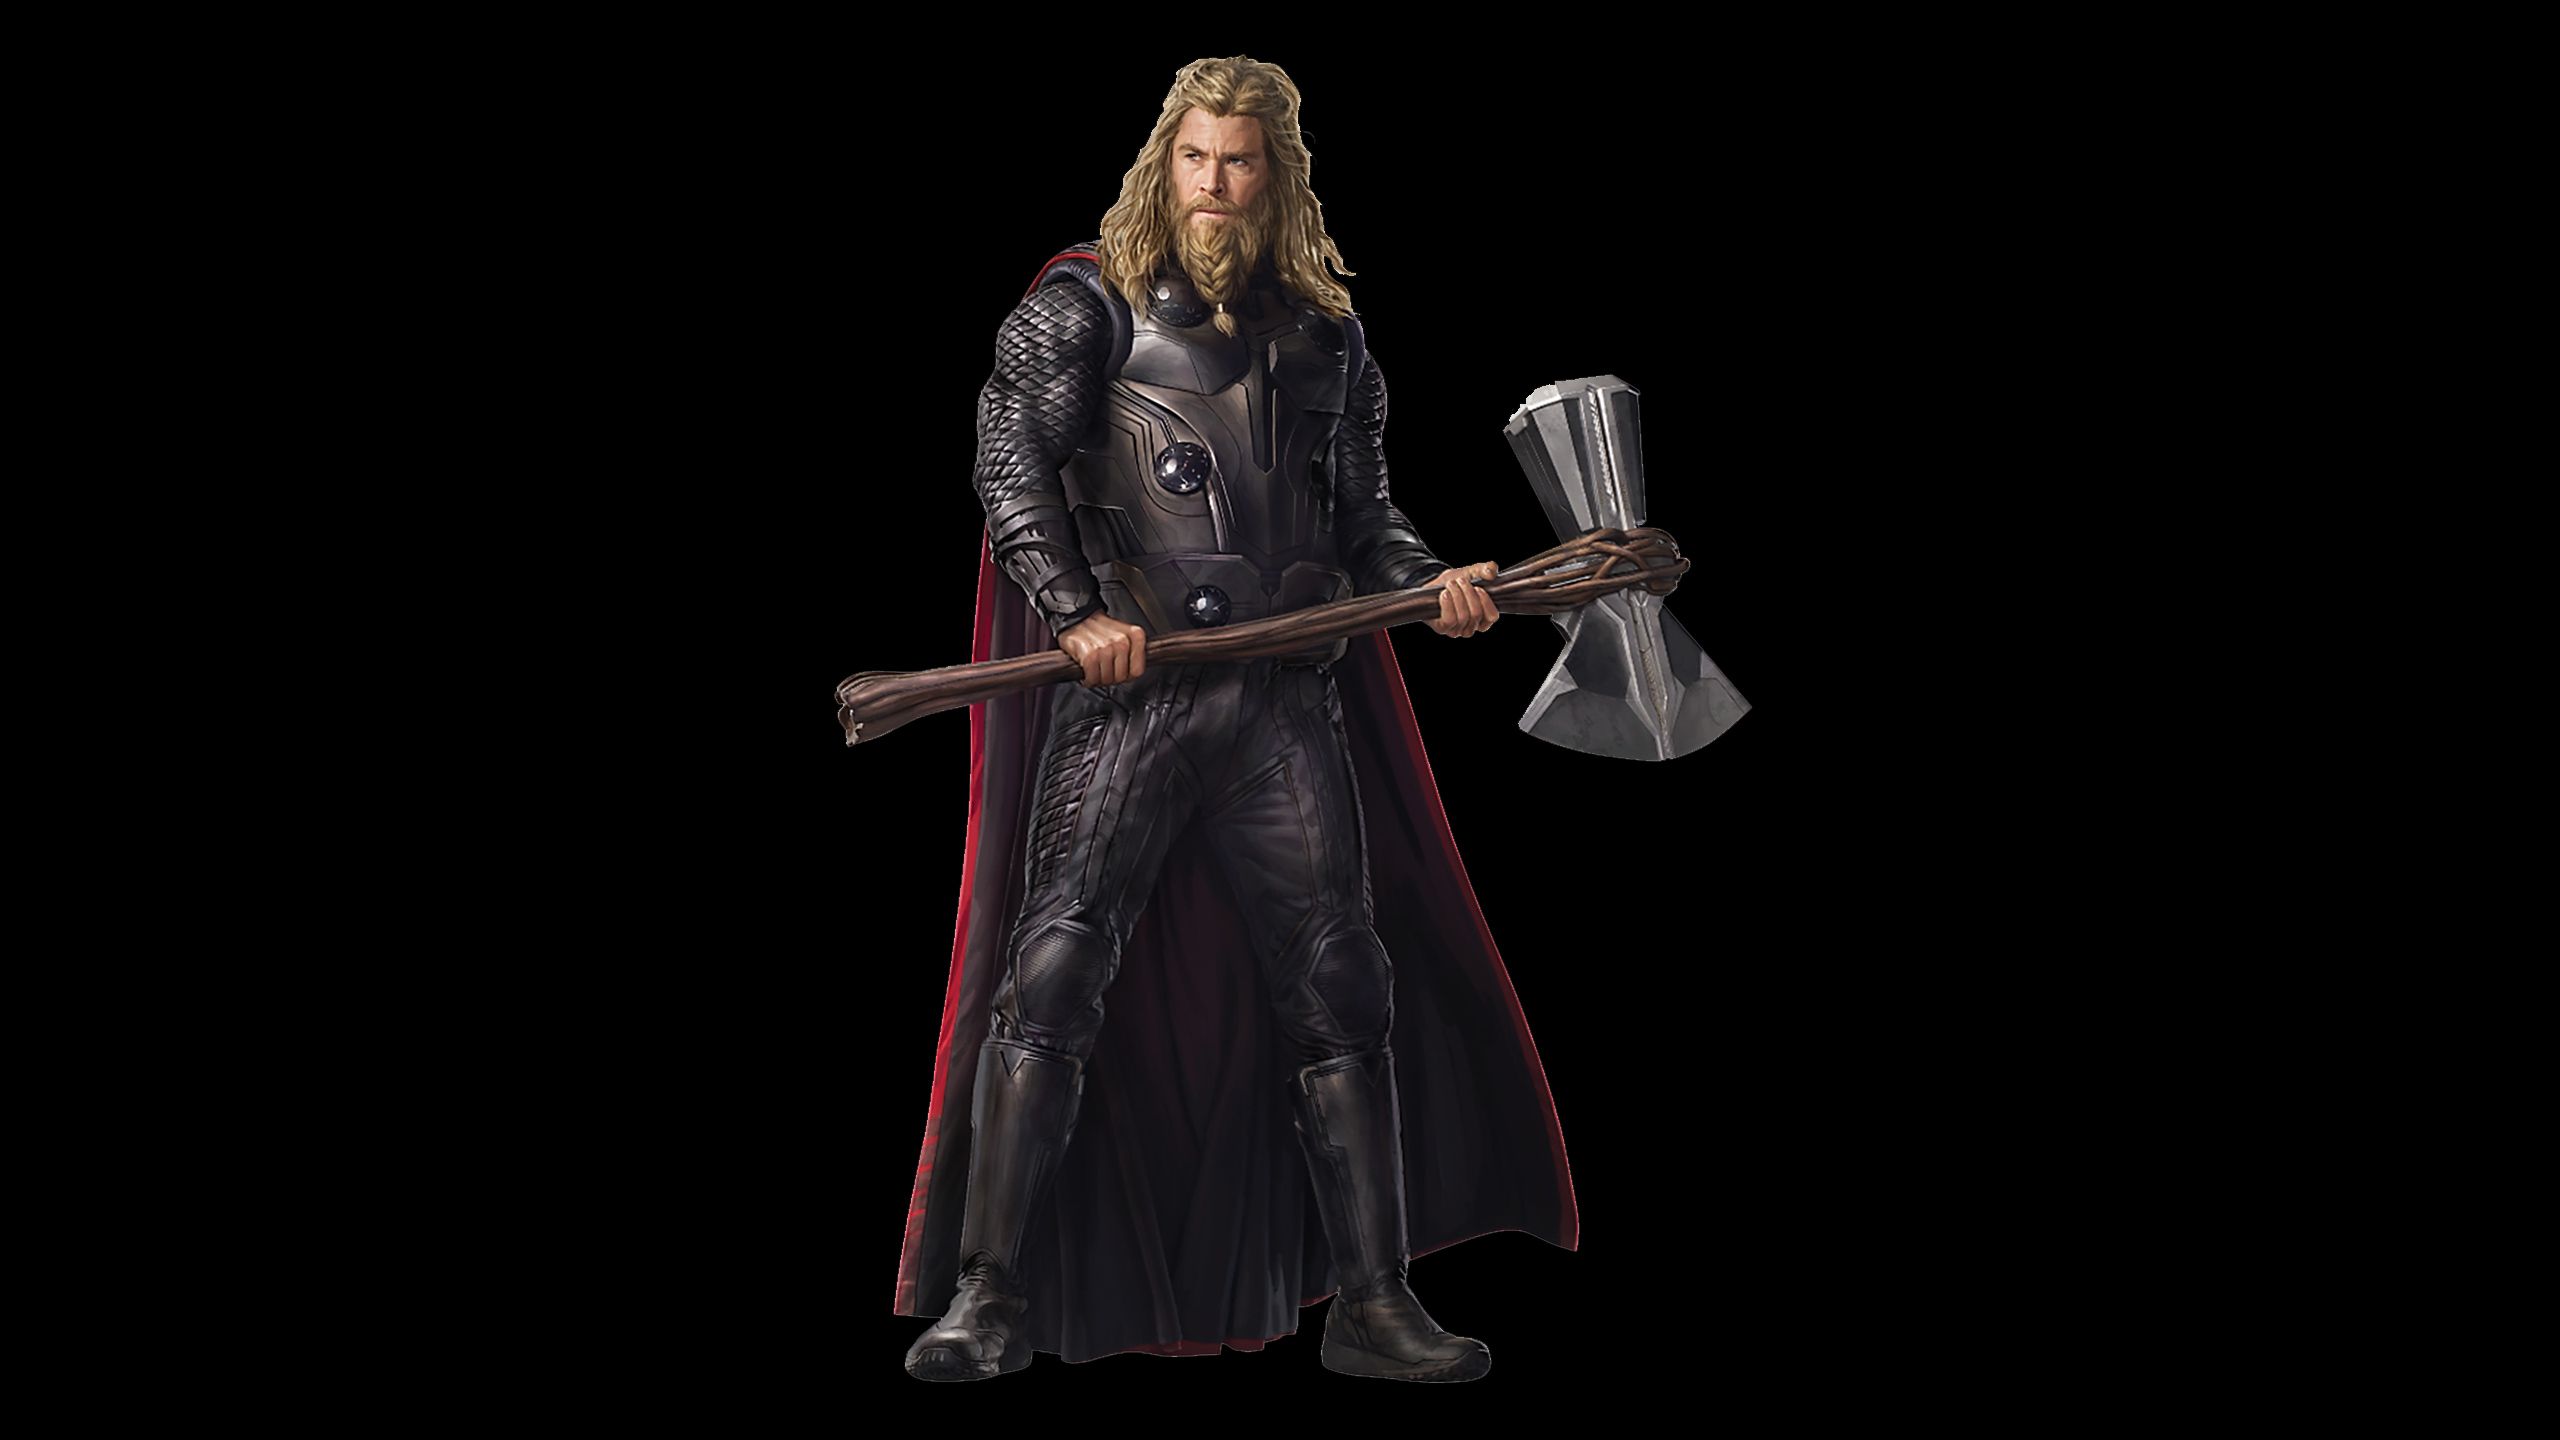 Bearded Thor, HD Superheroes, 4k Wallpaper, Image, Background, Photo and Picture